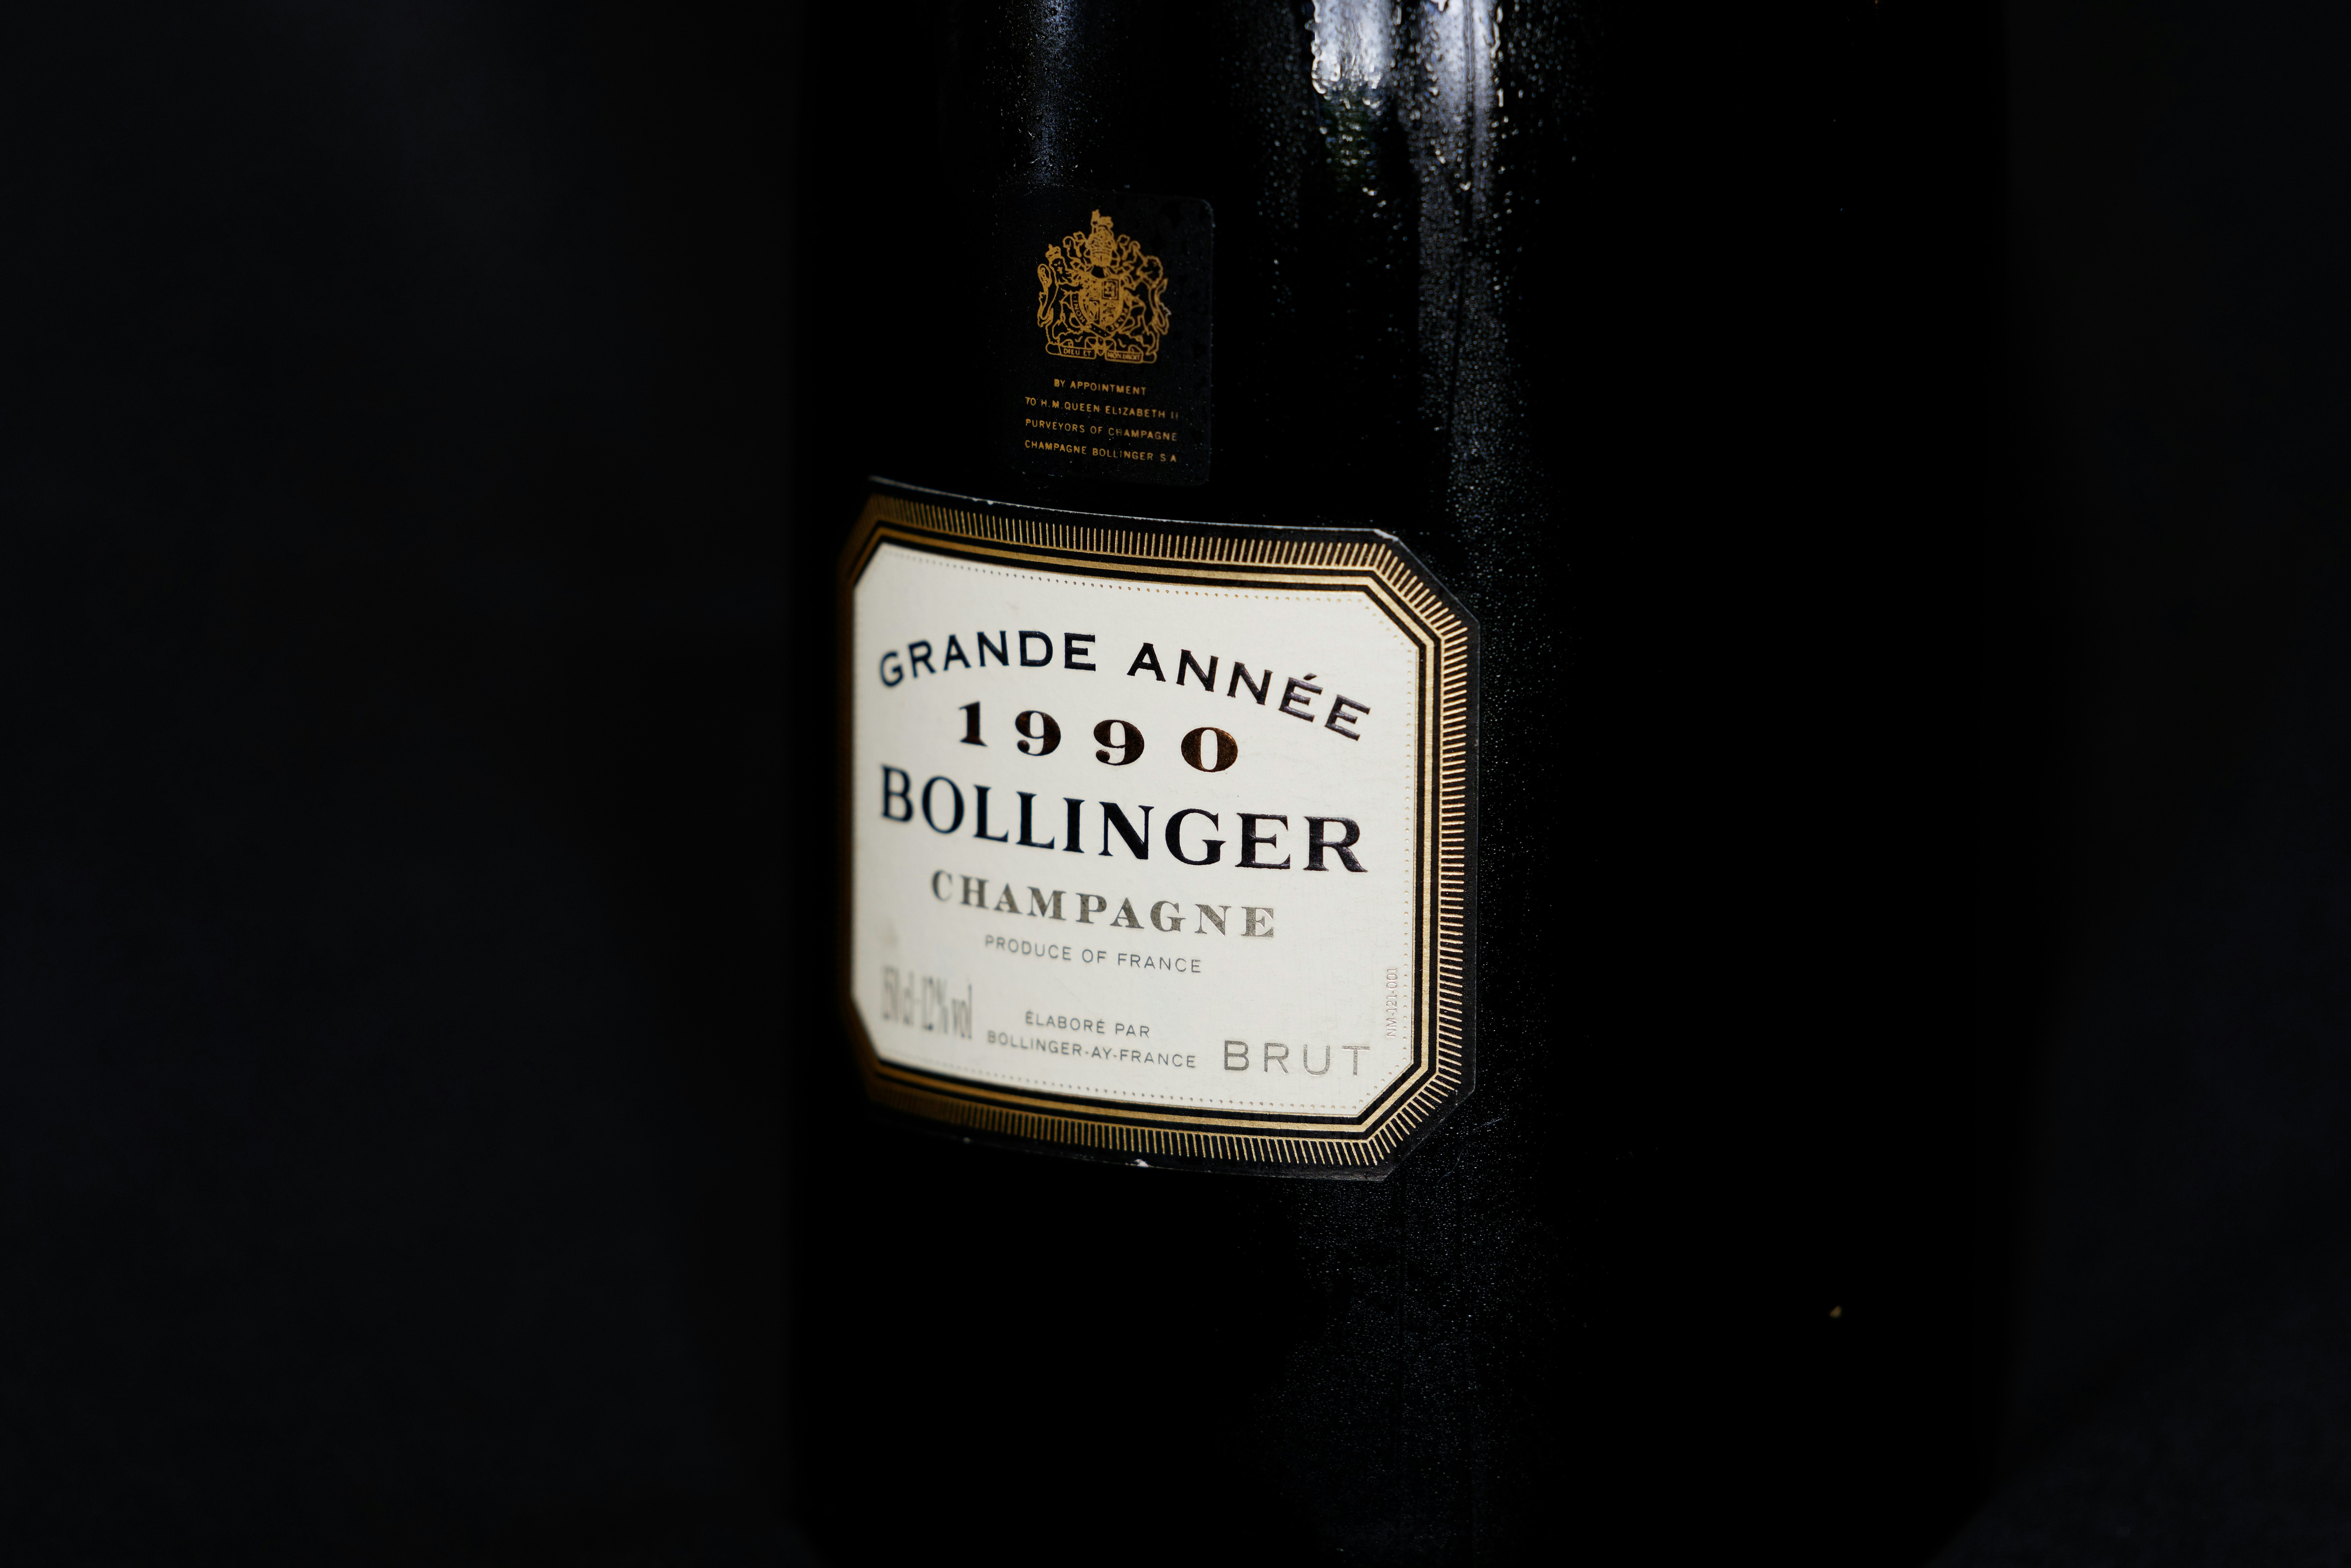 the lable on a 1990 magnum of Bollinger champagne brut, a Grende Annee..